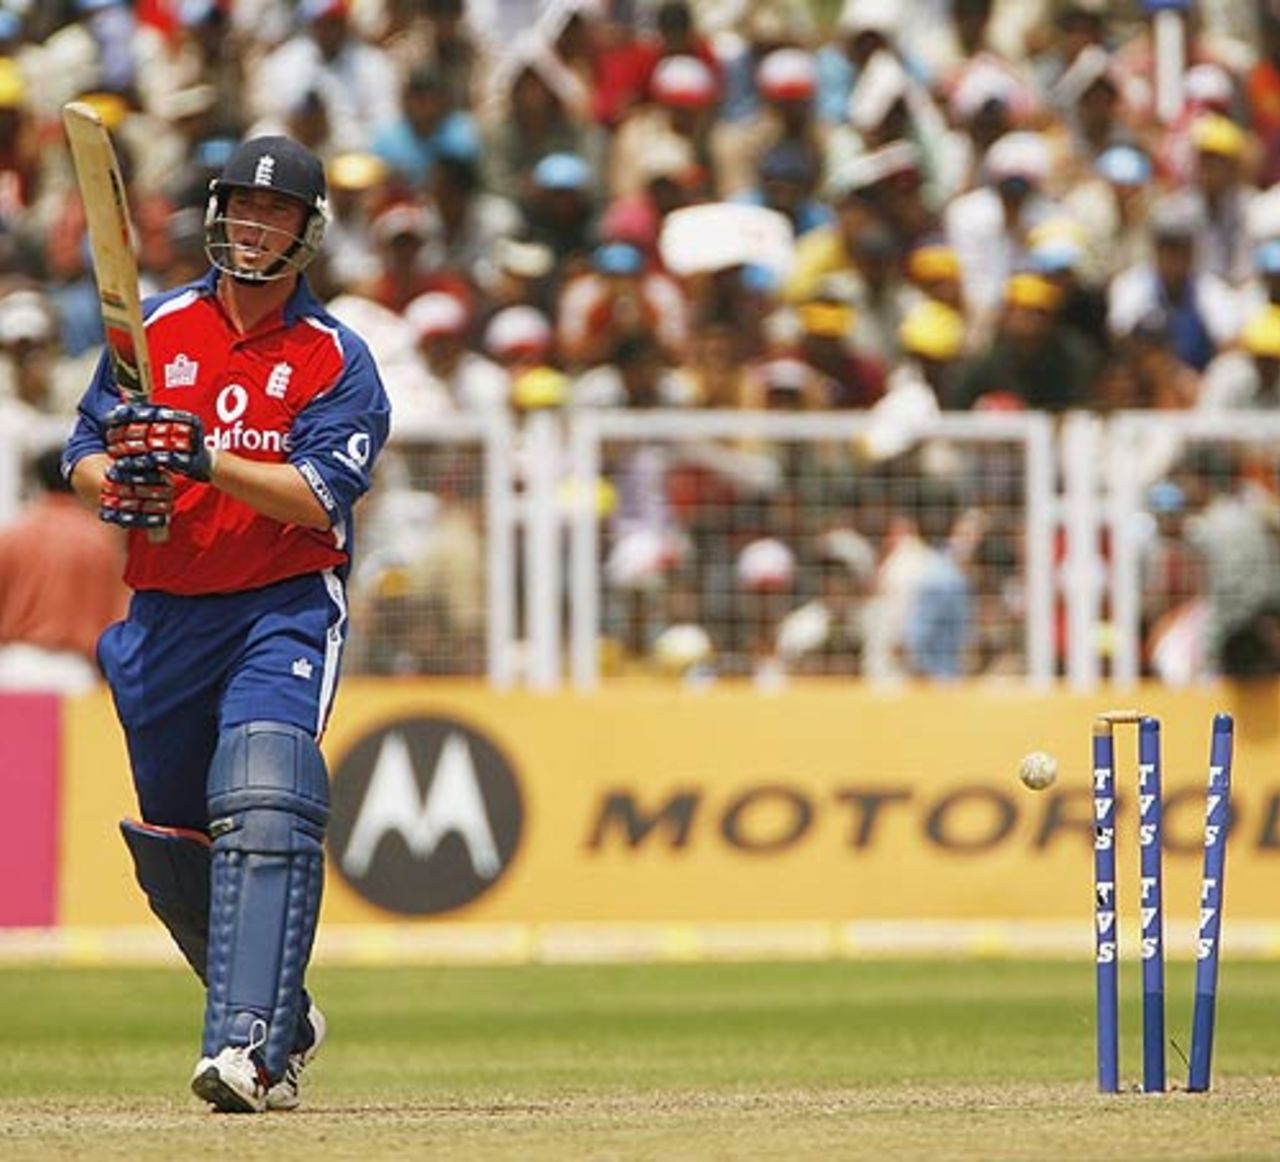 Ian Blackwell is bowled for nine as England slump at the death, India v England, 2nd ODI, Faridabad, March 31, 2006